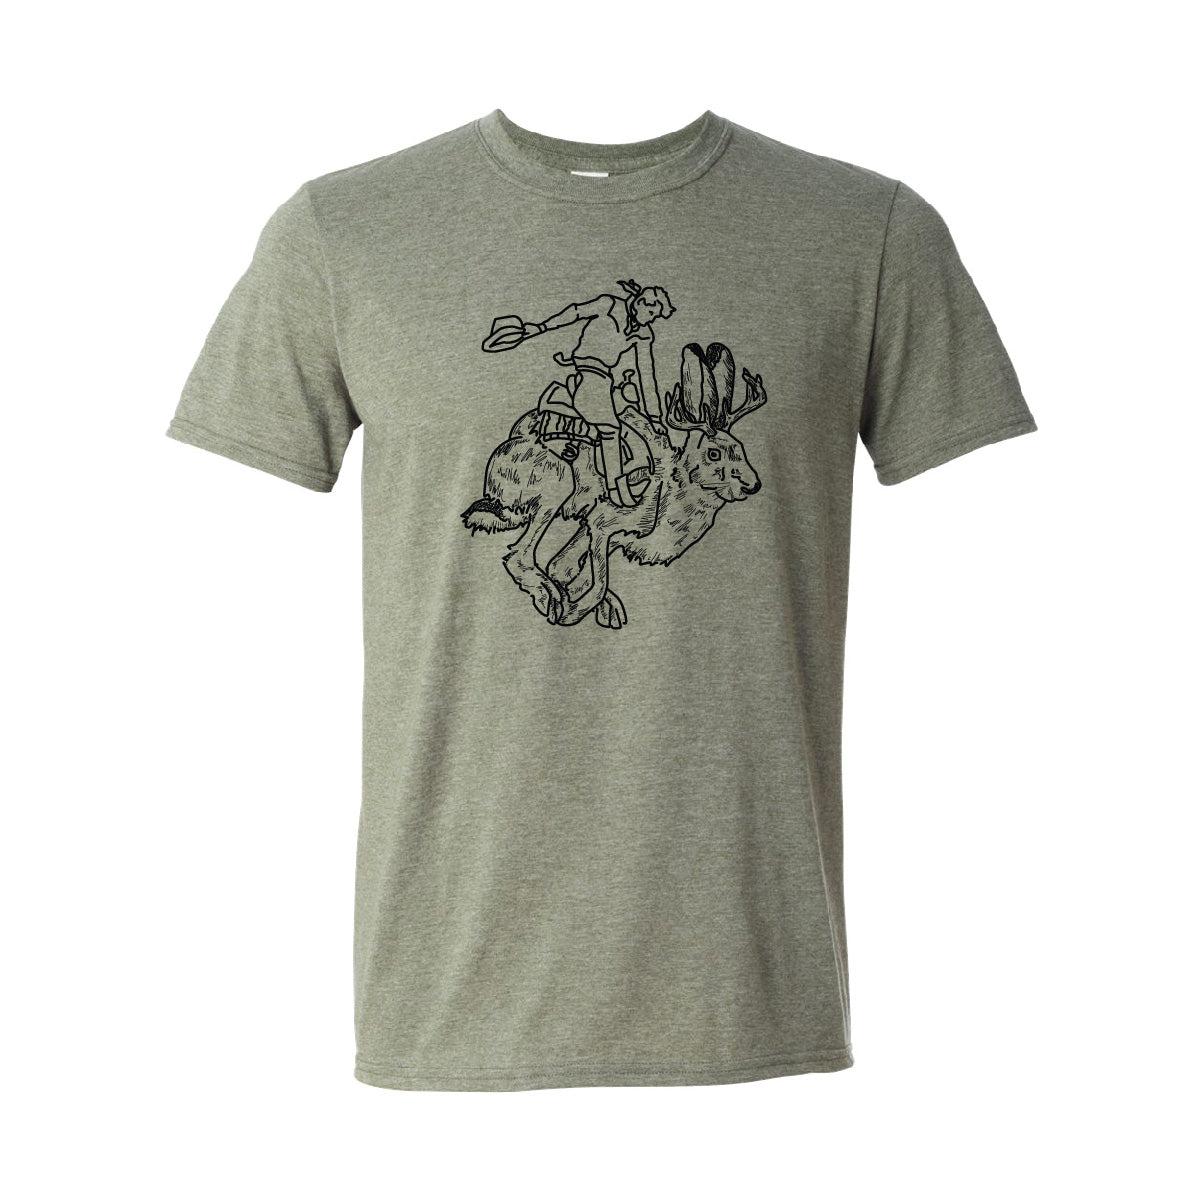 Roam Around Wear is a Wyoming t-shirt company based out of Gillette, Wyoming. Wyoming Jackalope and Rider t-shirt. Unisex tee shirt. Artisan designed.